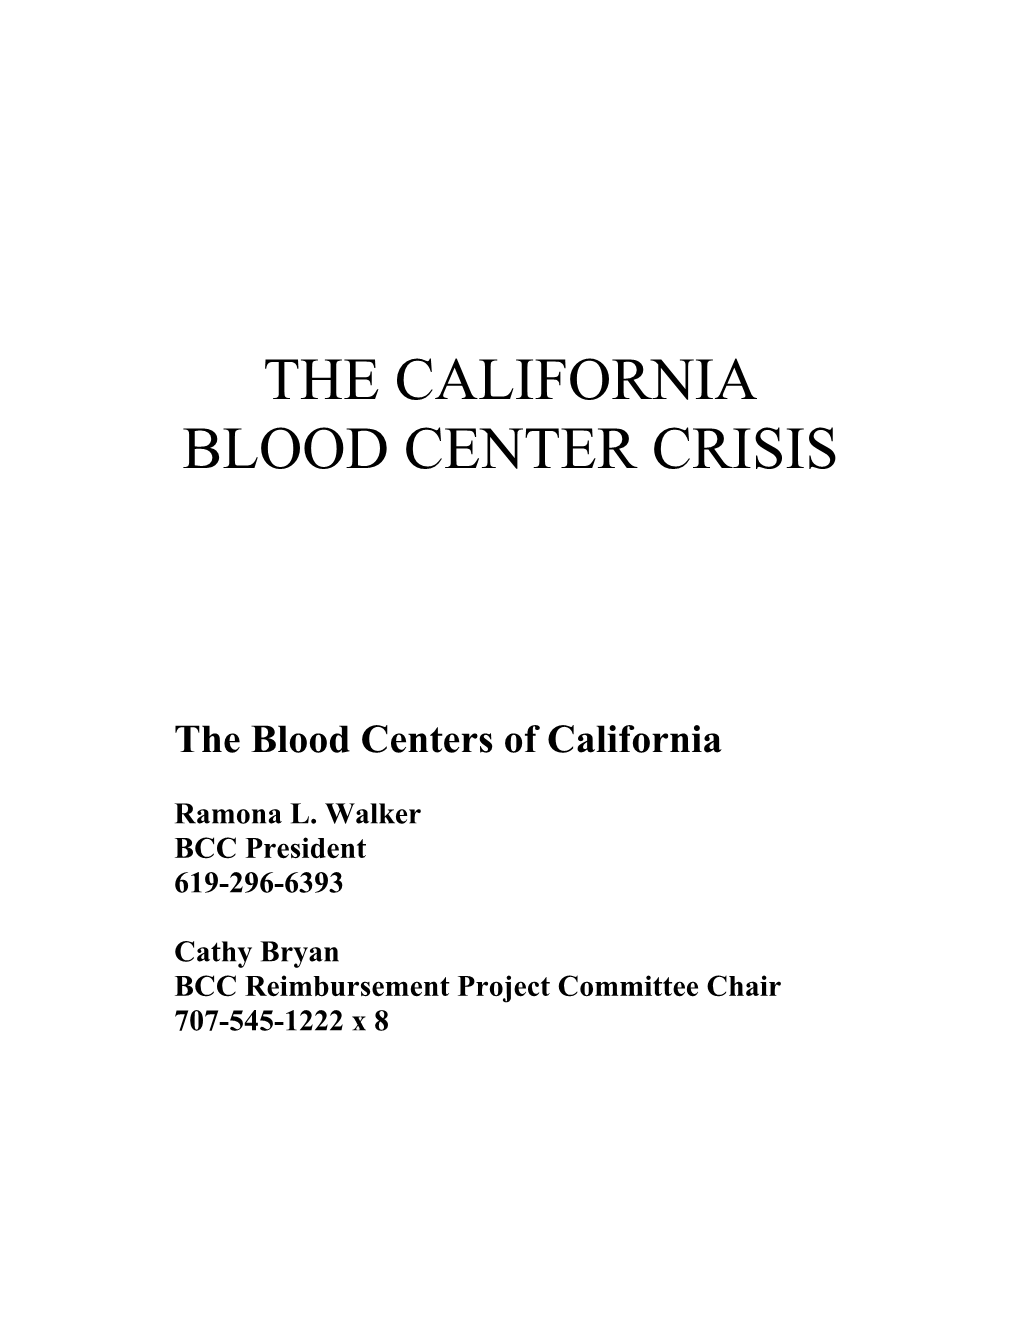 Inadequate Payments to California Blood Centers